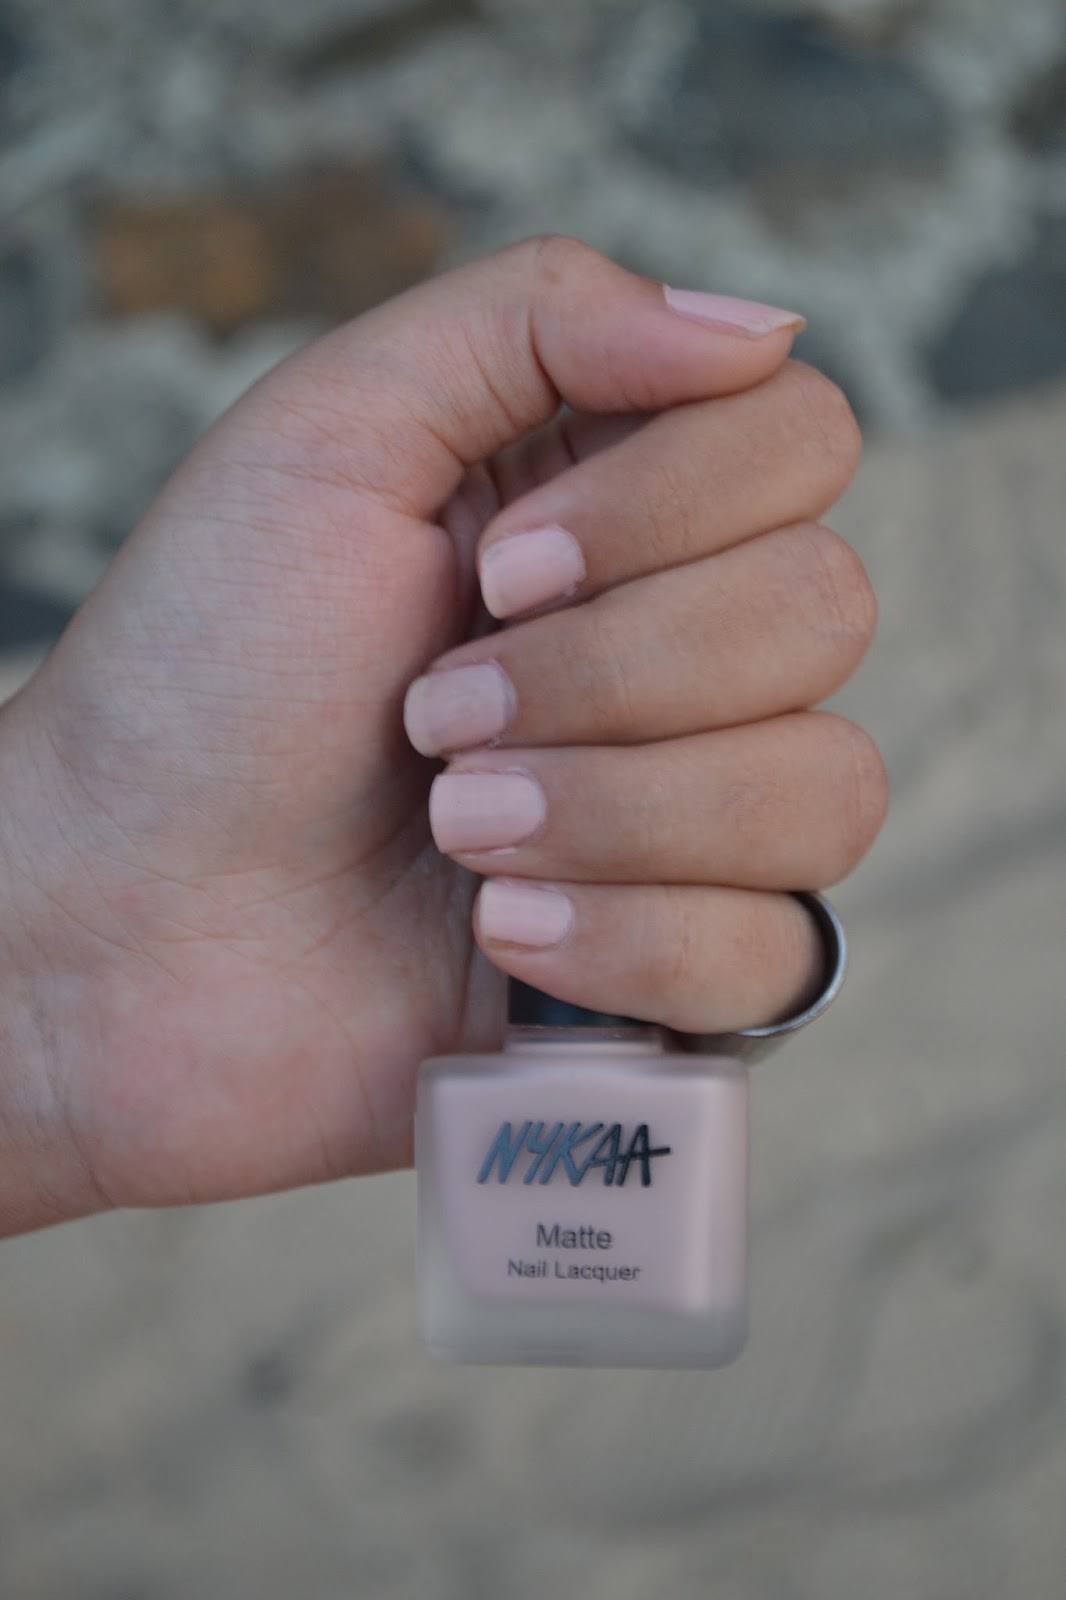 Nykaa - Neon matte nail lacquer | Swatches and review | matte collection -  YouTube